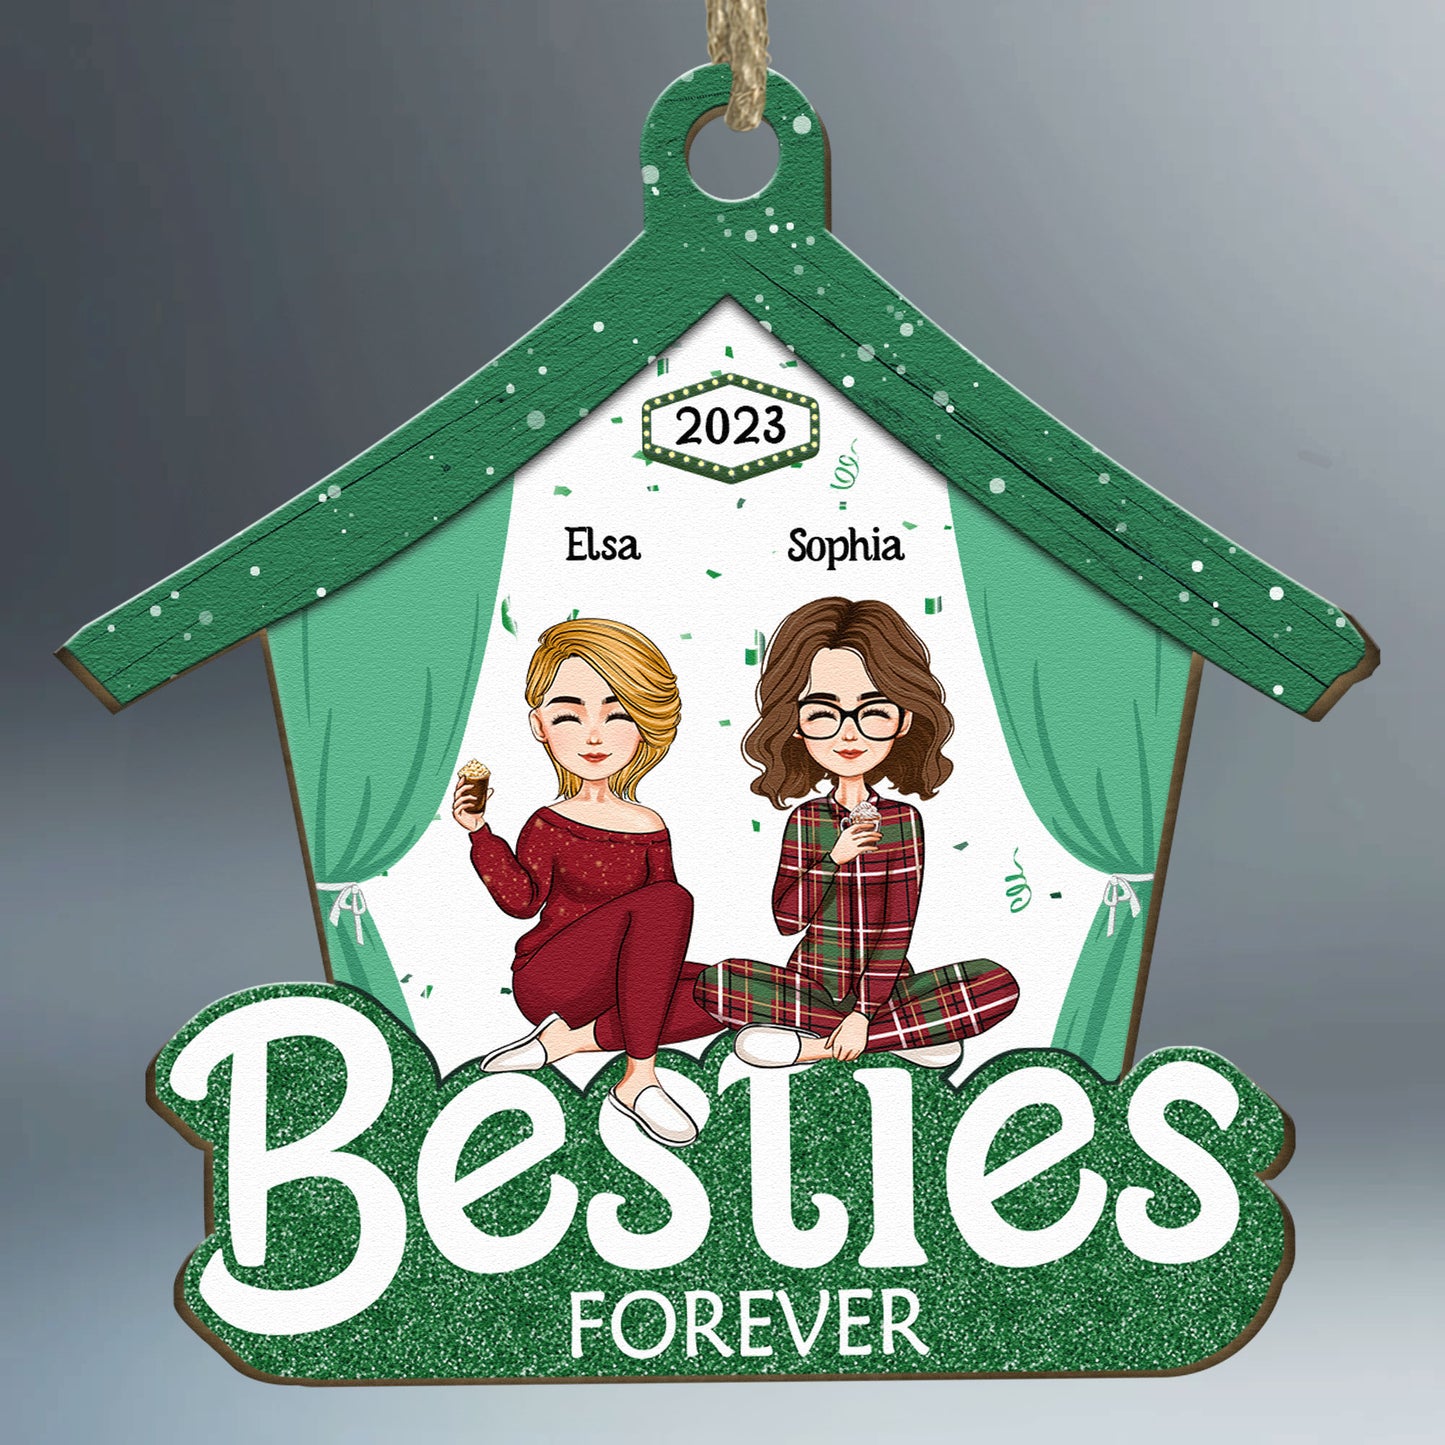 Besties Forever - Limited Version - Personalized Wooden Ornament